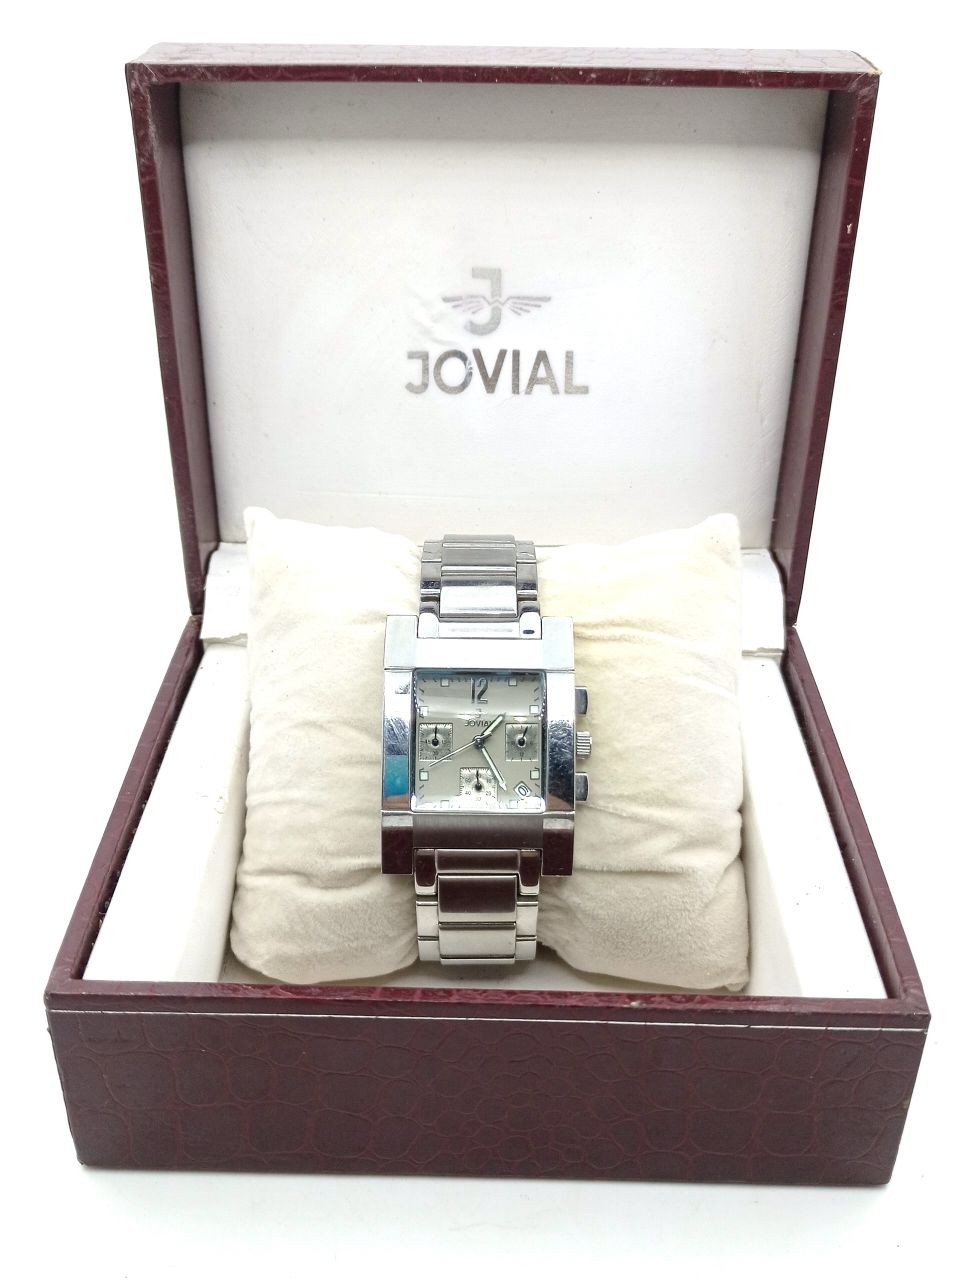 JOVIAL WATCH "THE ITEM BECOMES IRREVERSIBLE WHEN THE RESERVE IS REACHED"⚠️